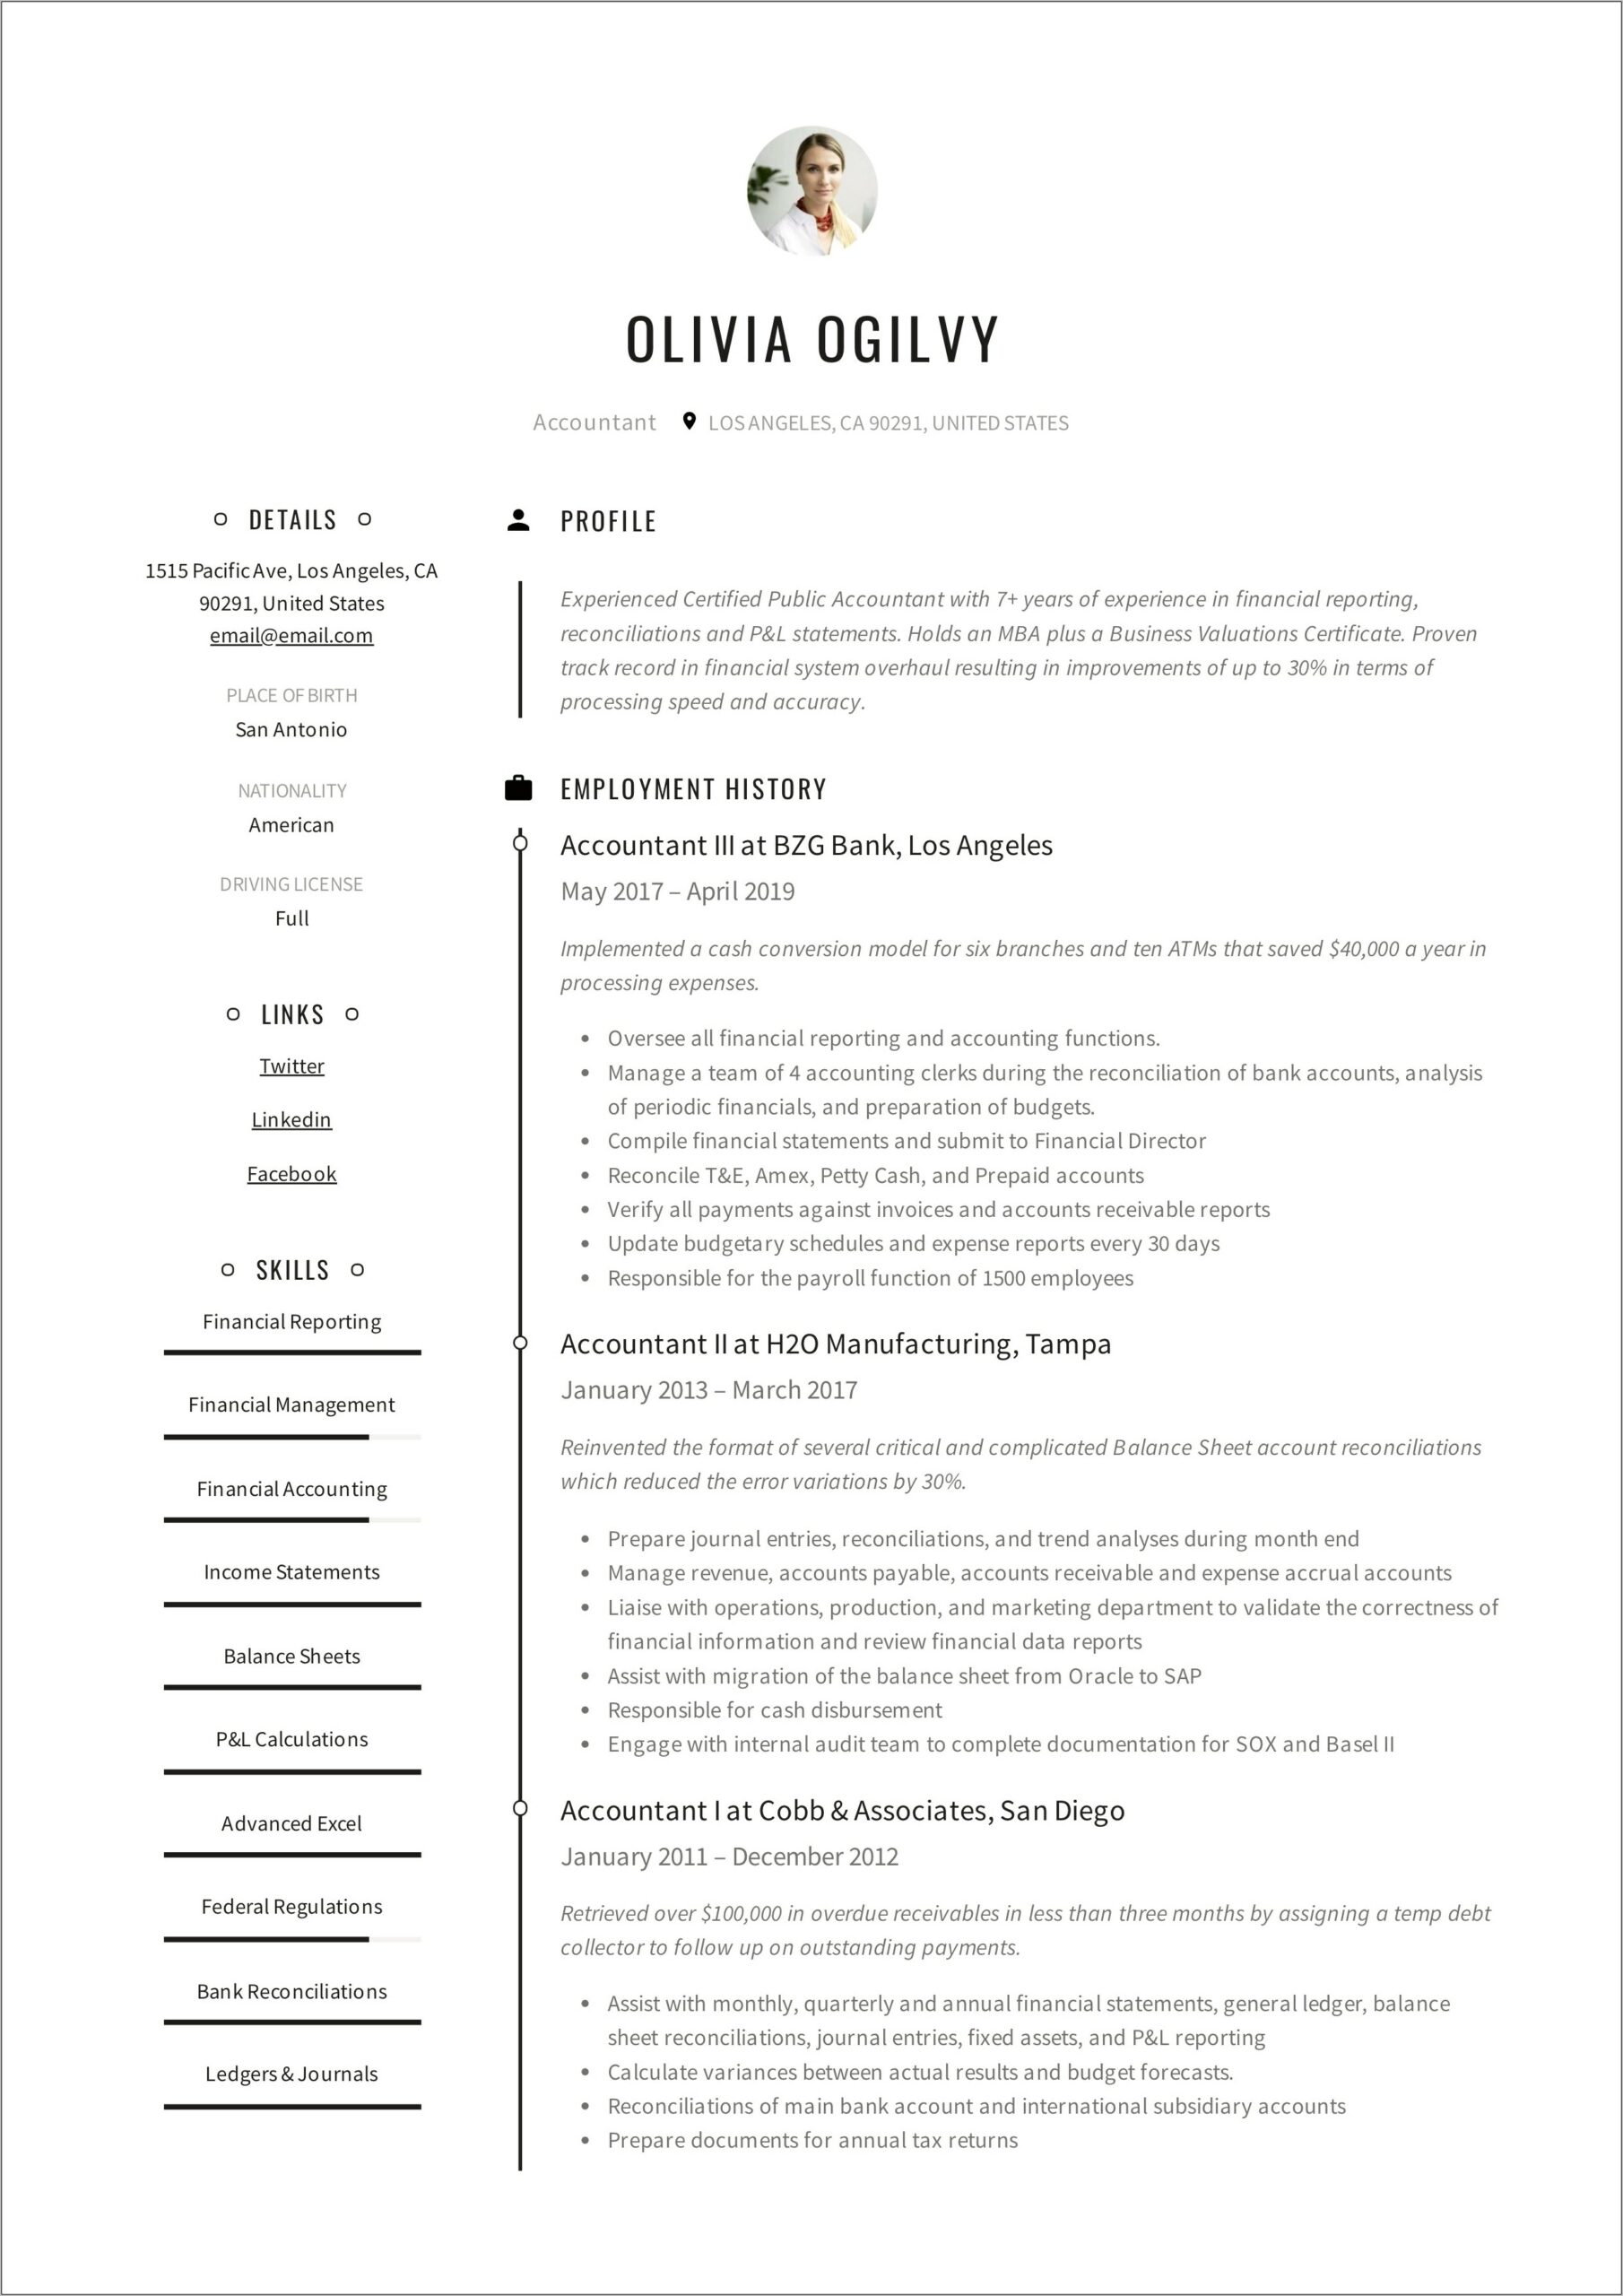 Resume Objective Line For Accountant